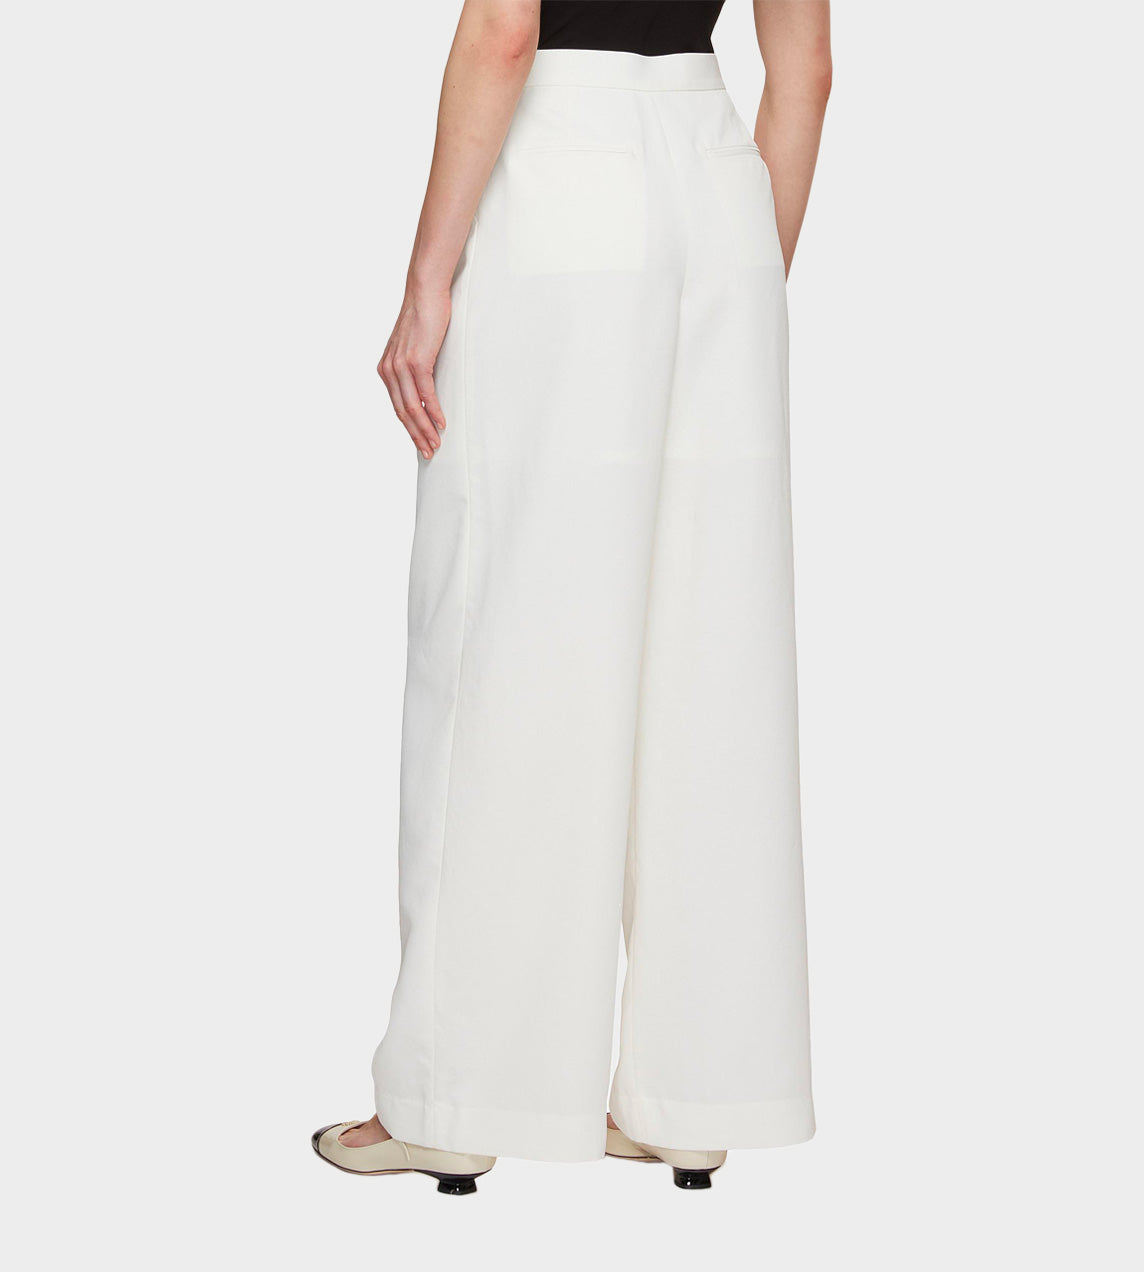 KIMHEKIM - Belted Wide Leg Trousers White